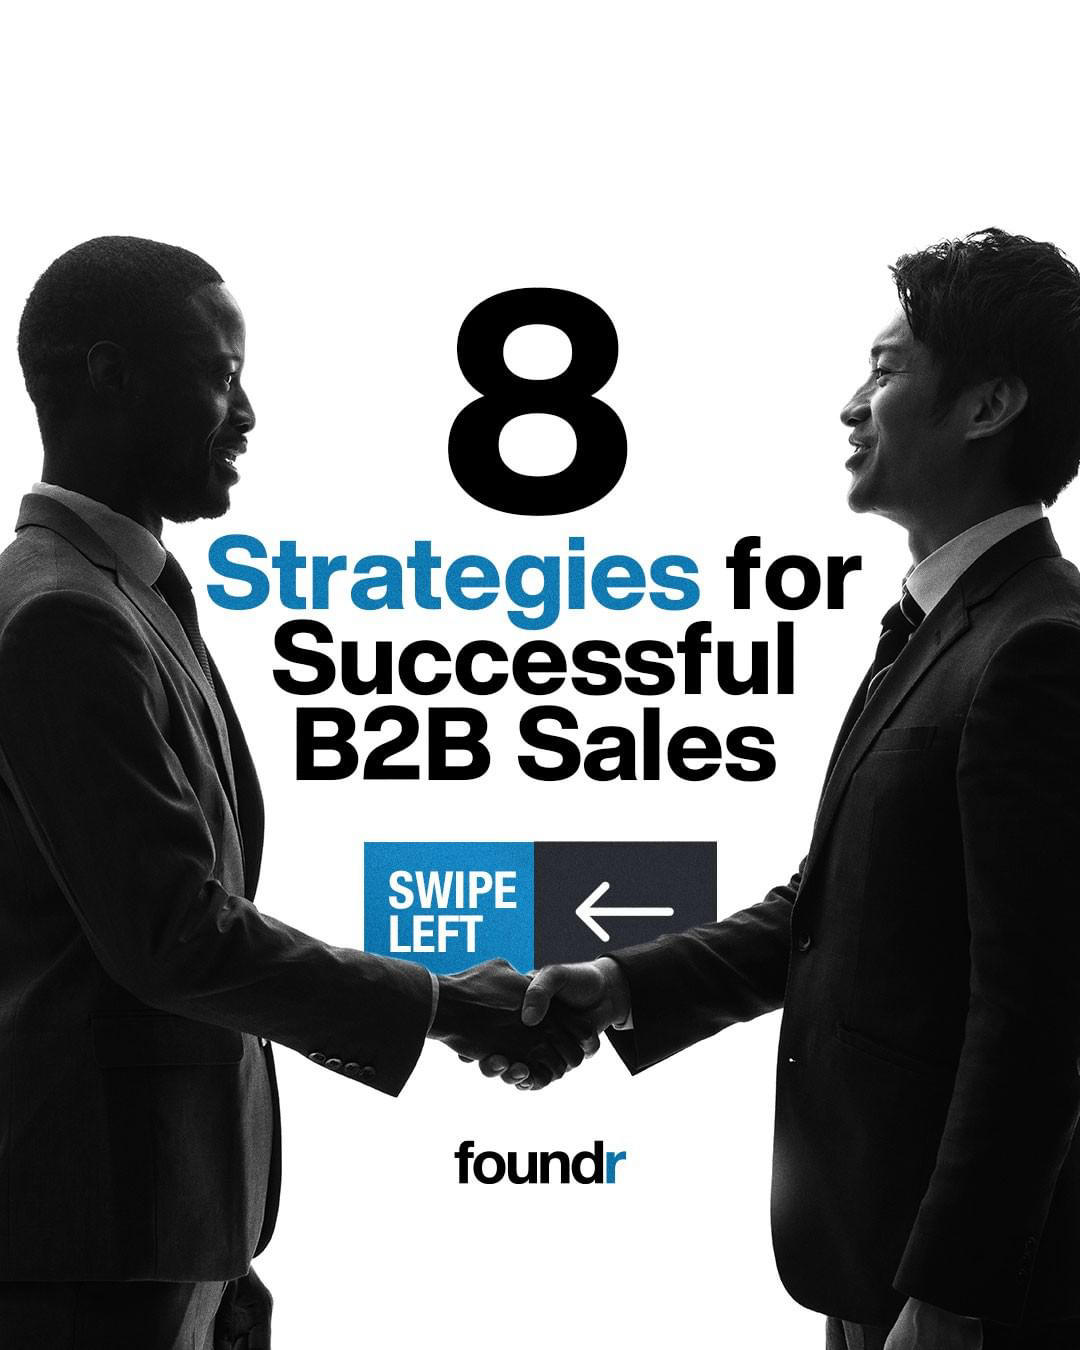 Foundr - 8 Strategies for Successful B2B SalesWe’re excited to share that our new “Find Your Dream C